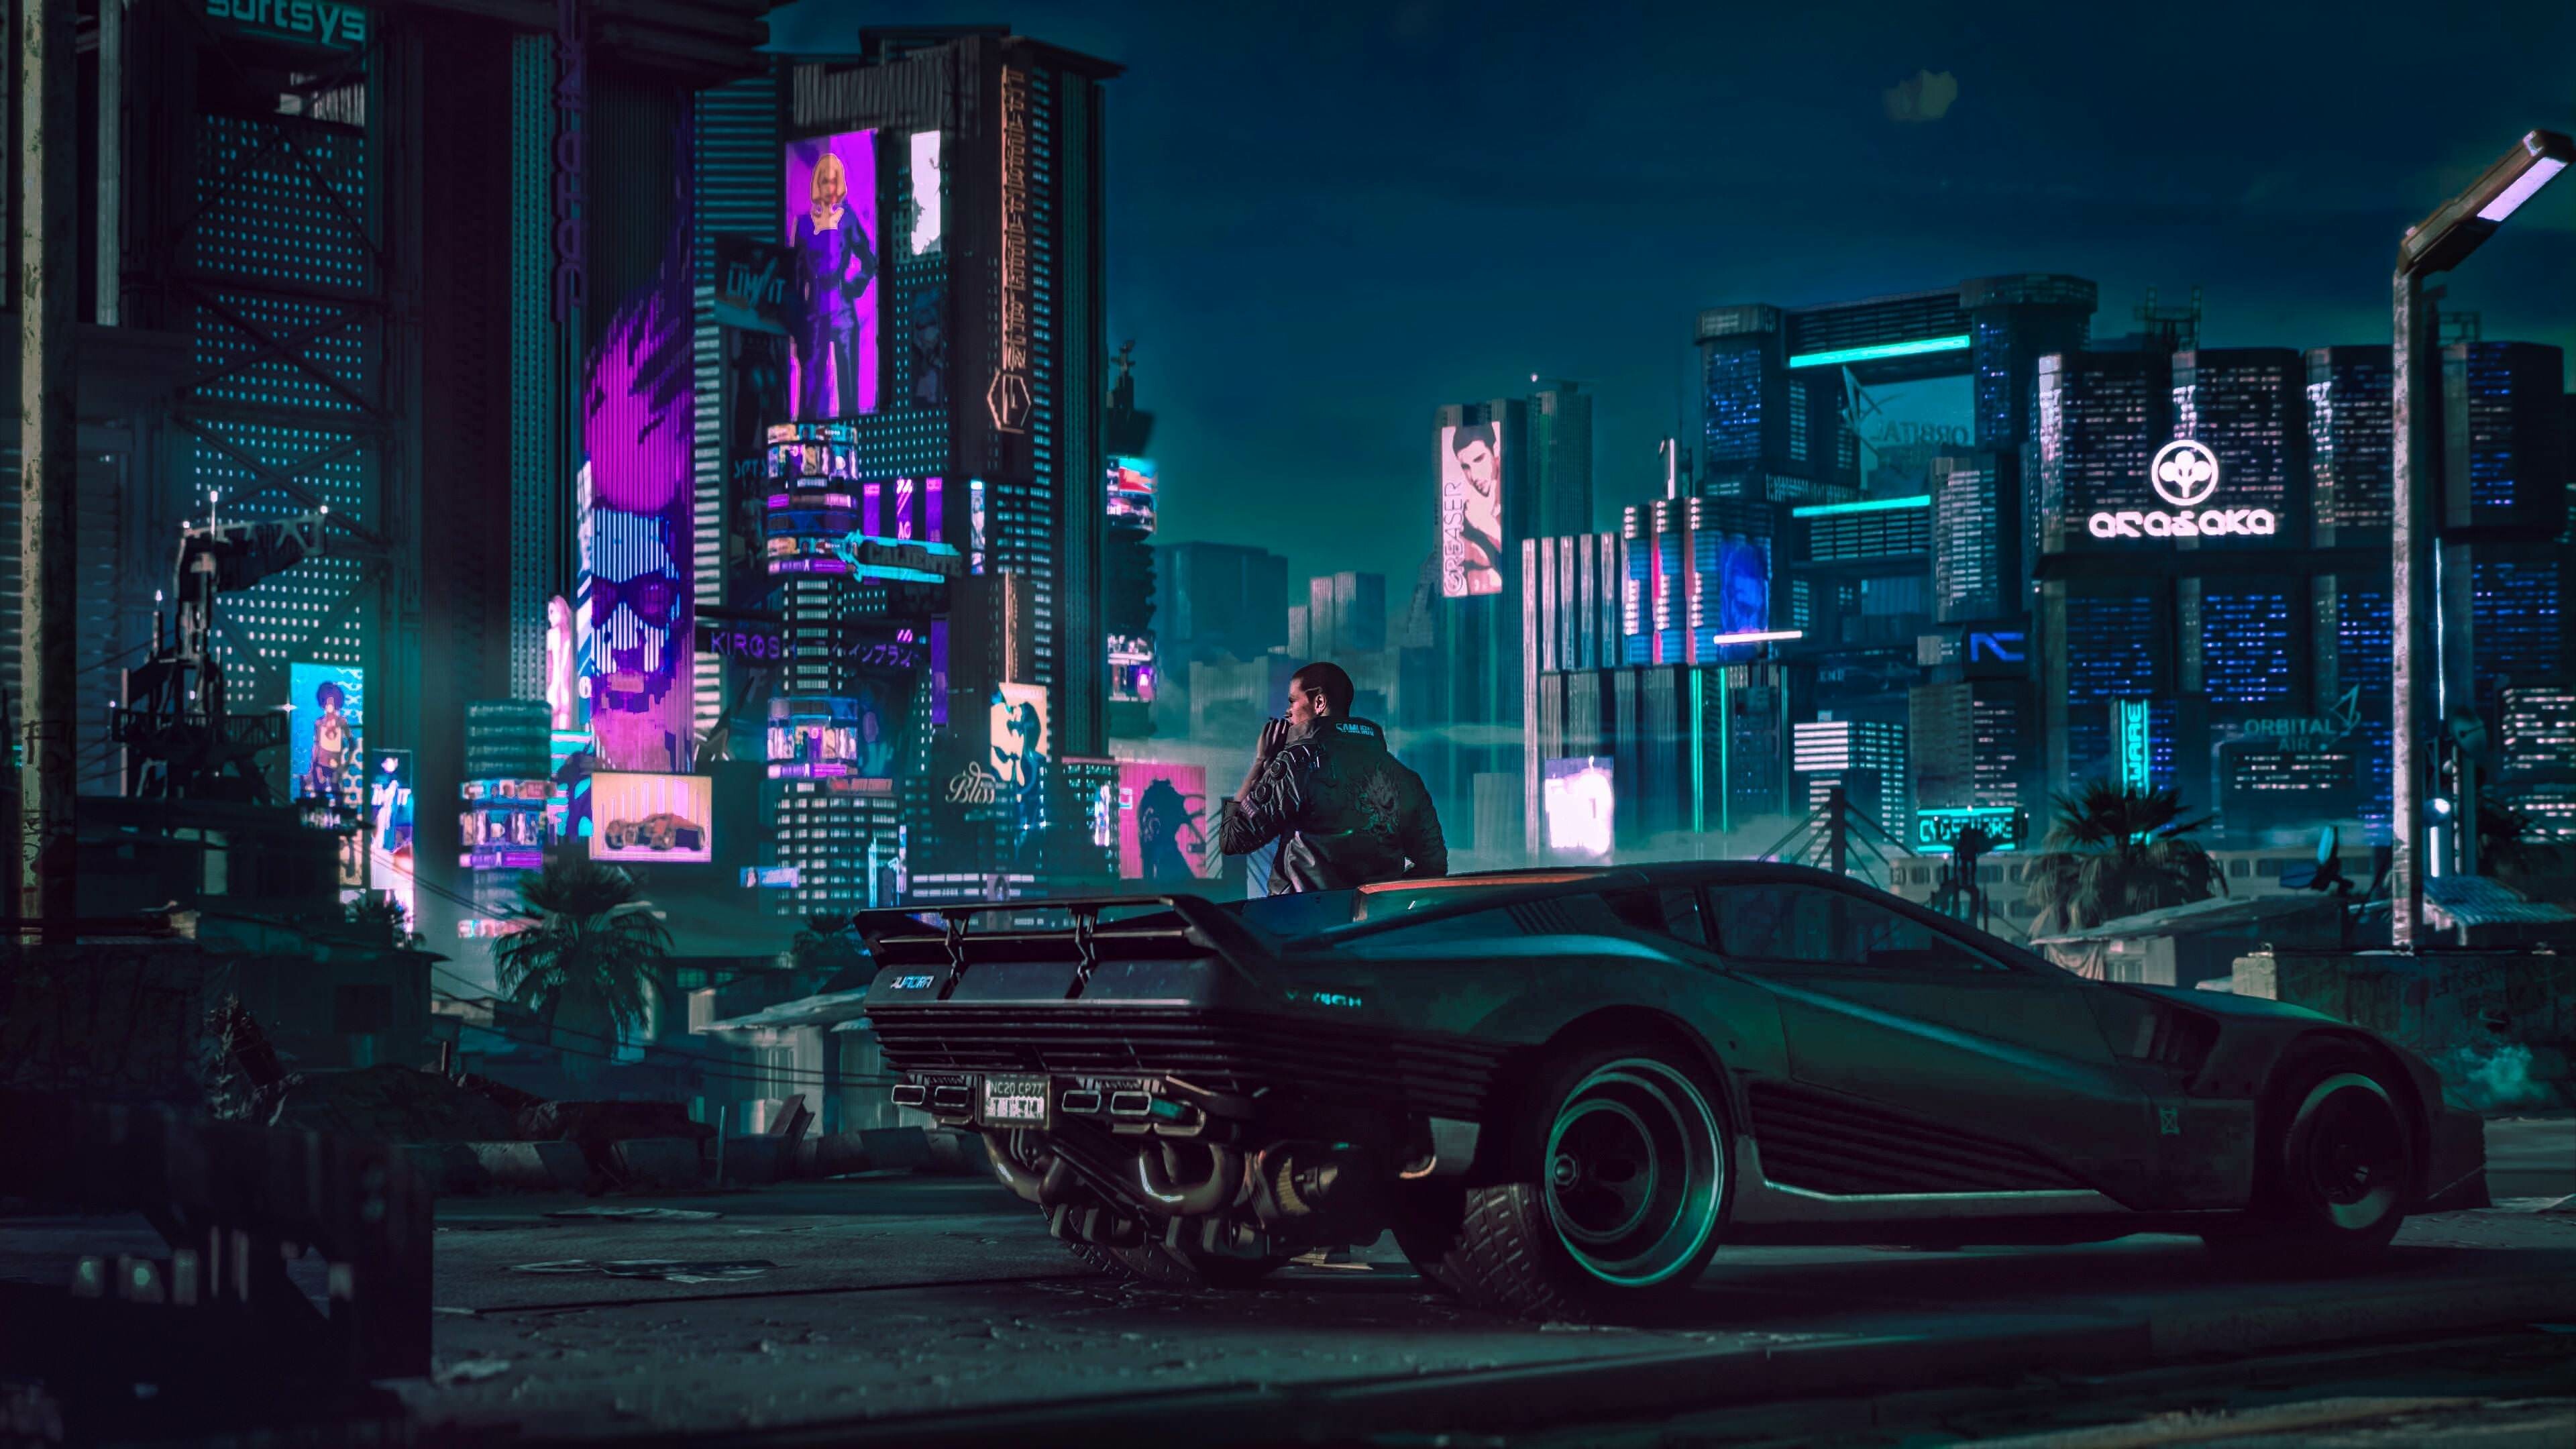 Cyberpunk 2077: An action role-playing video game developed by CD Projekt Red. 3840x2160 4K Wallpaper.